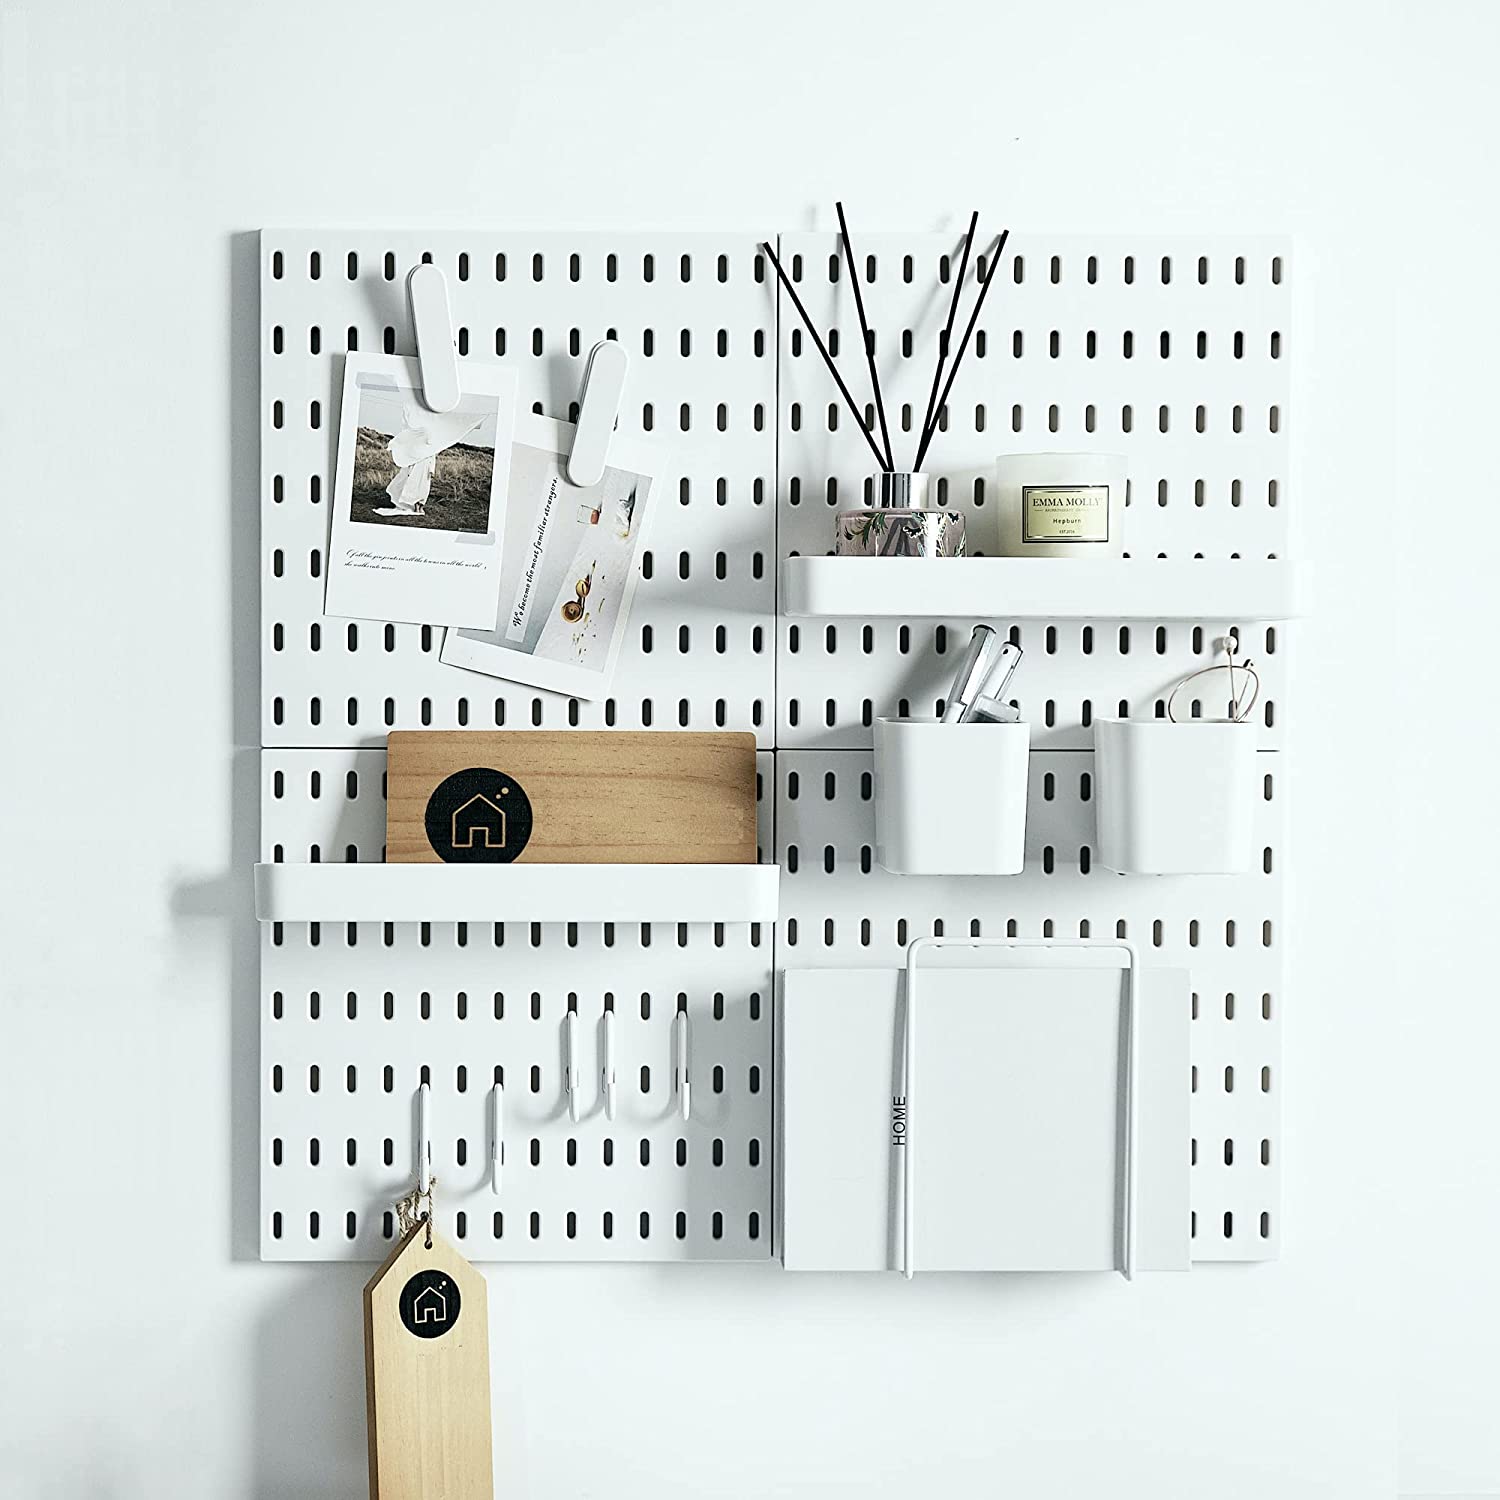 A pegboard organizer from amazon.